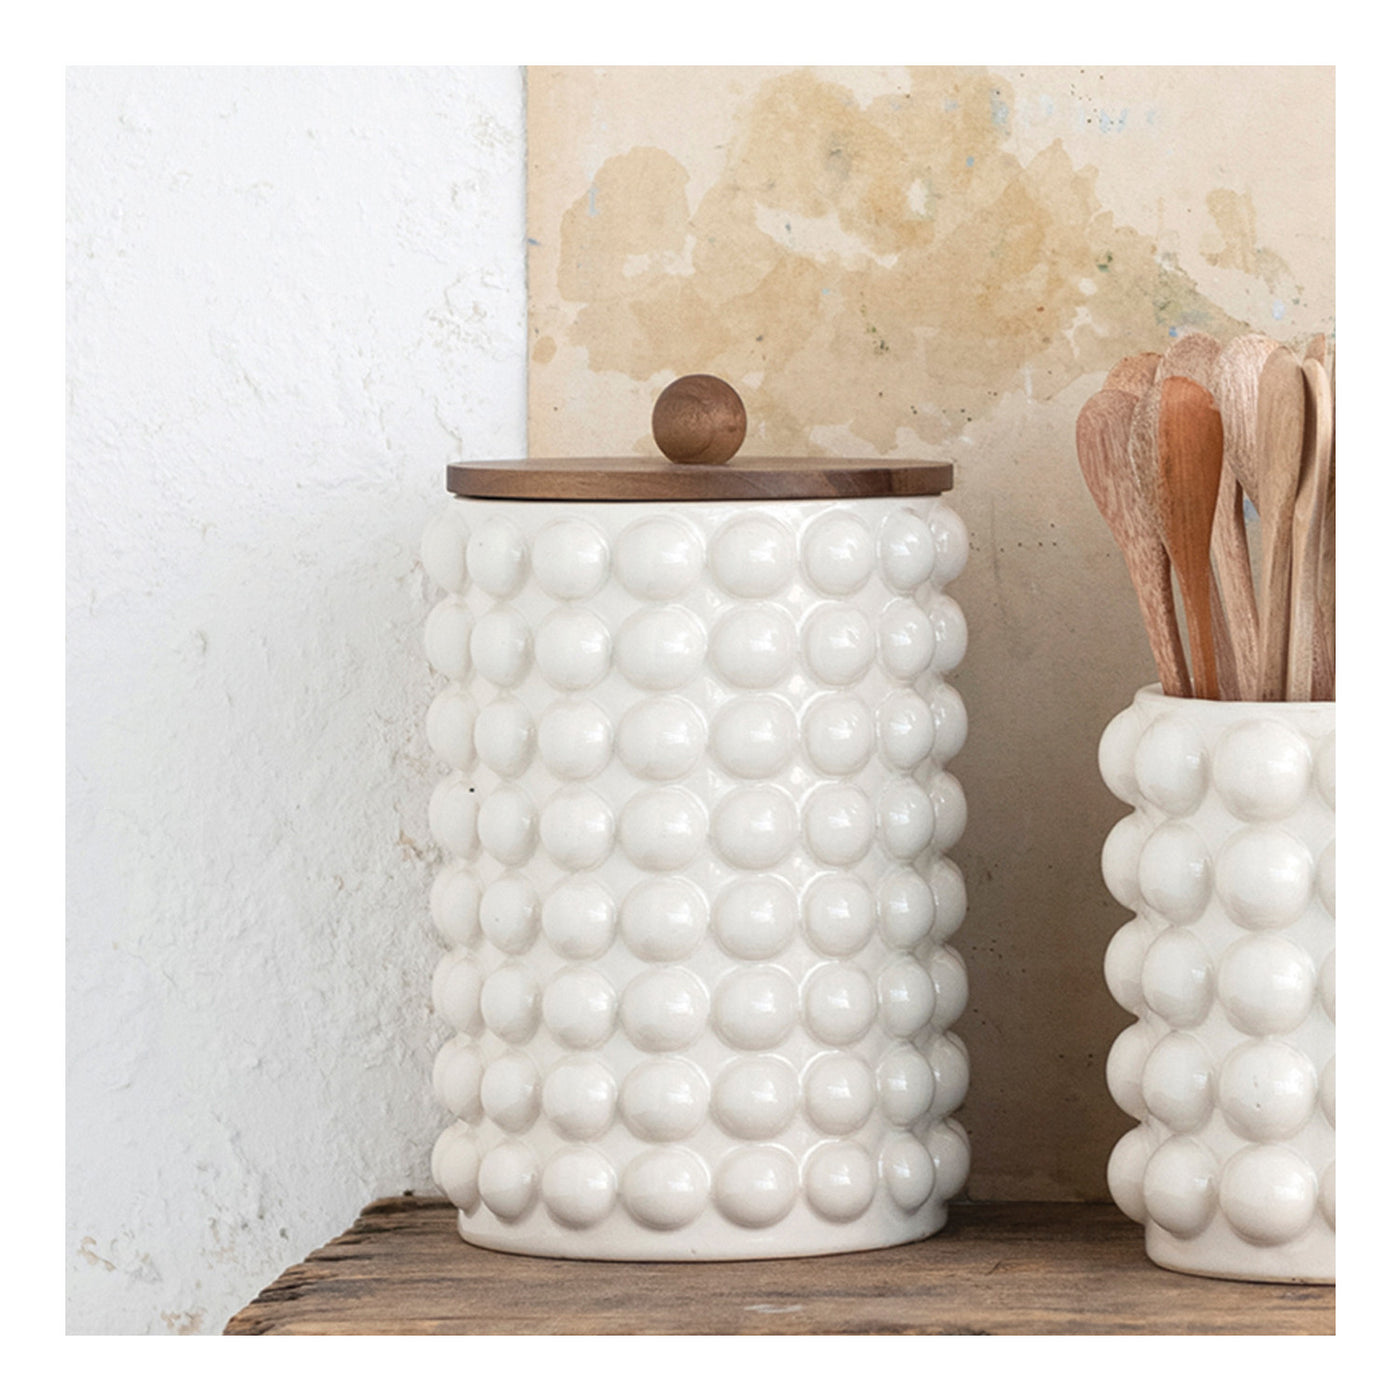 6-3/4" Round x 10-1/4"H Stoneware Canister w/ Raised Dots & Acacia Wood Lid, White & Natural